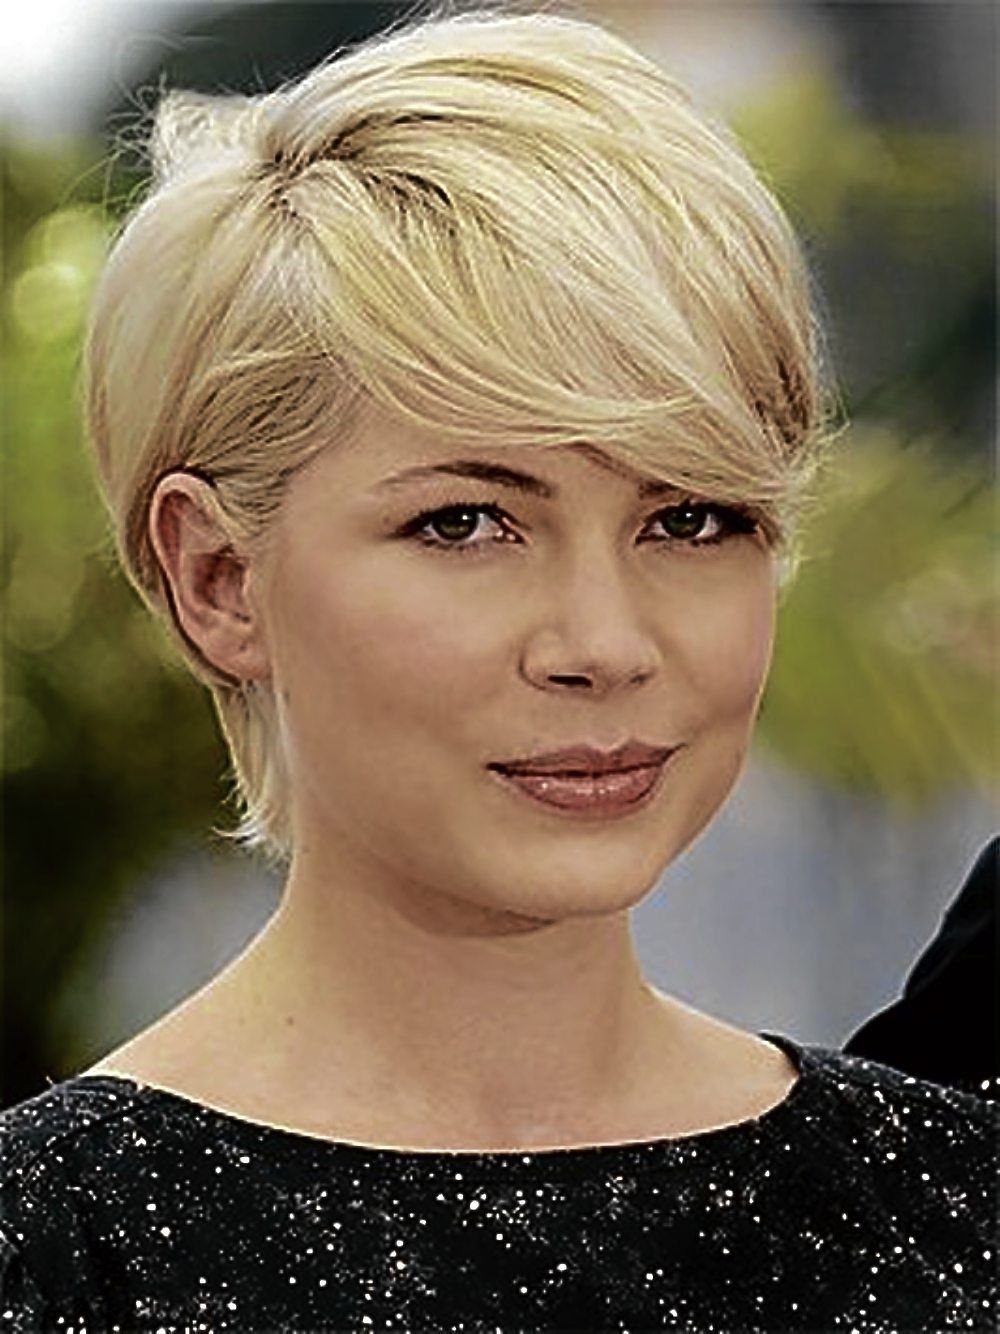 Photos Of Pixie Haircuts Cute Pixie Hairstyles For Women Celeb Inside Best And Newest Cute Pixie Hairstyles (View 15 of 15)